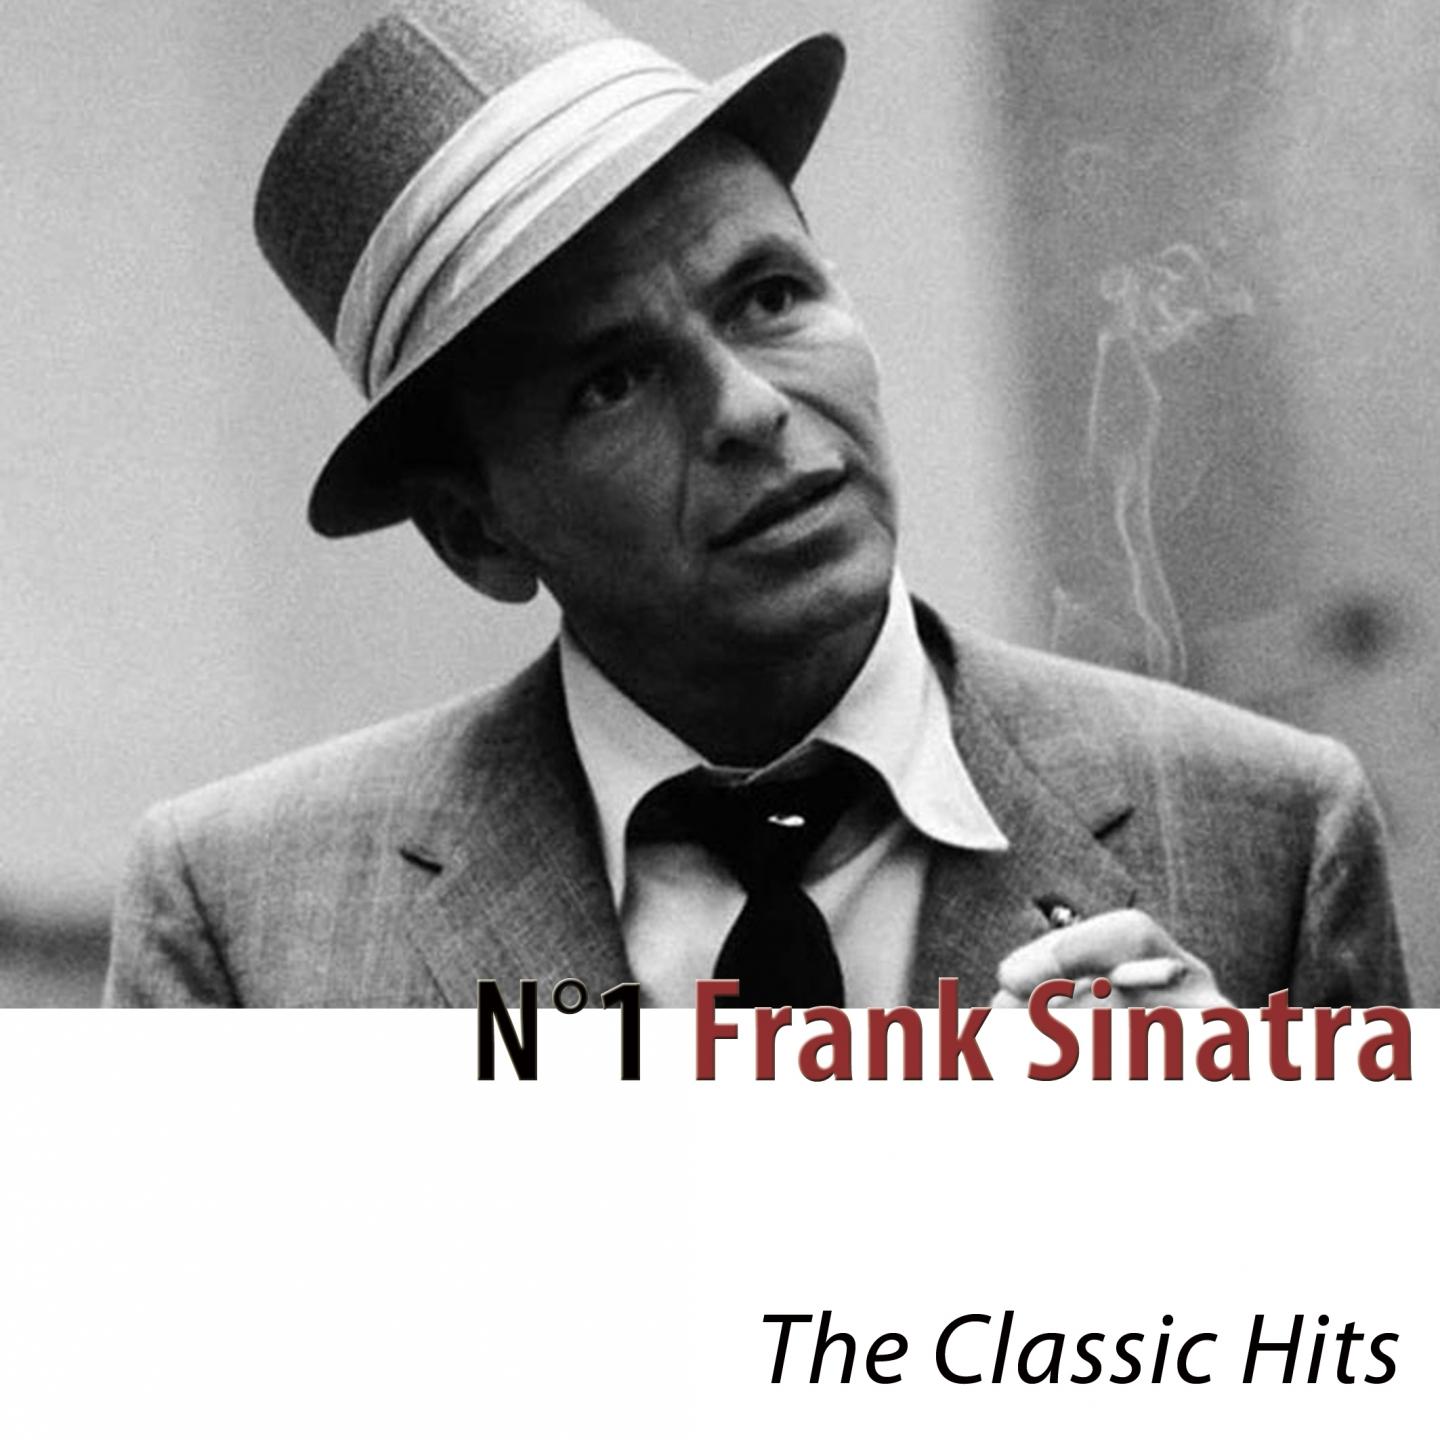 N 1 Frank Sinatra The Classic Hits Remastered